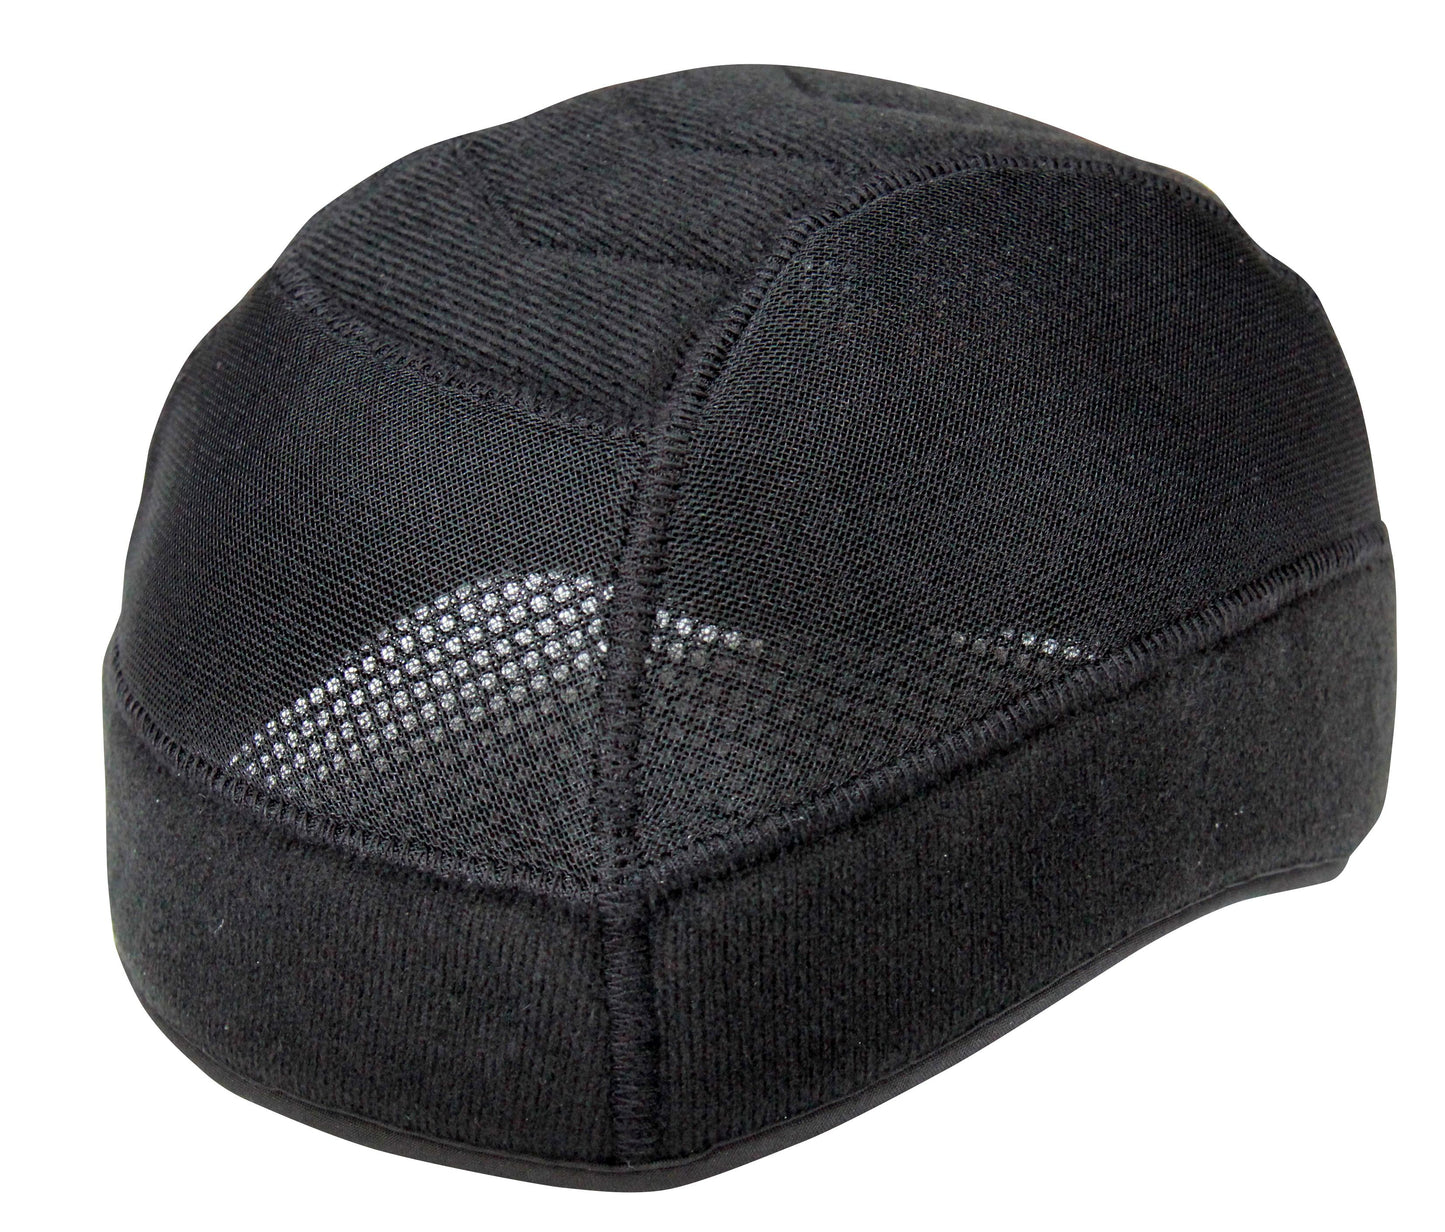 Replacement Liner for Tipperary Royal Helmet